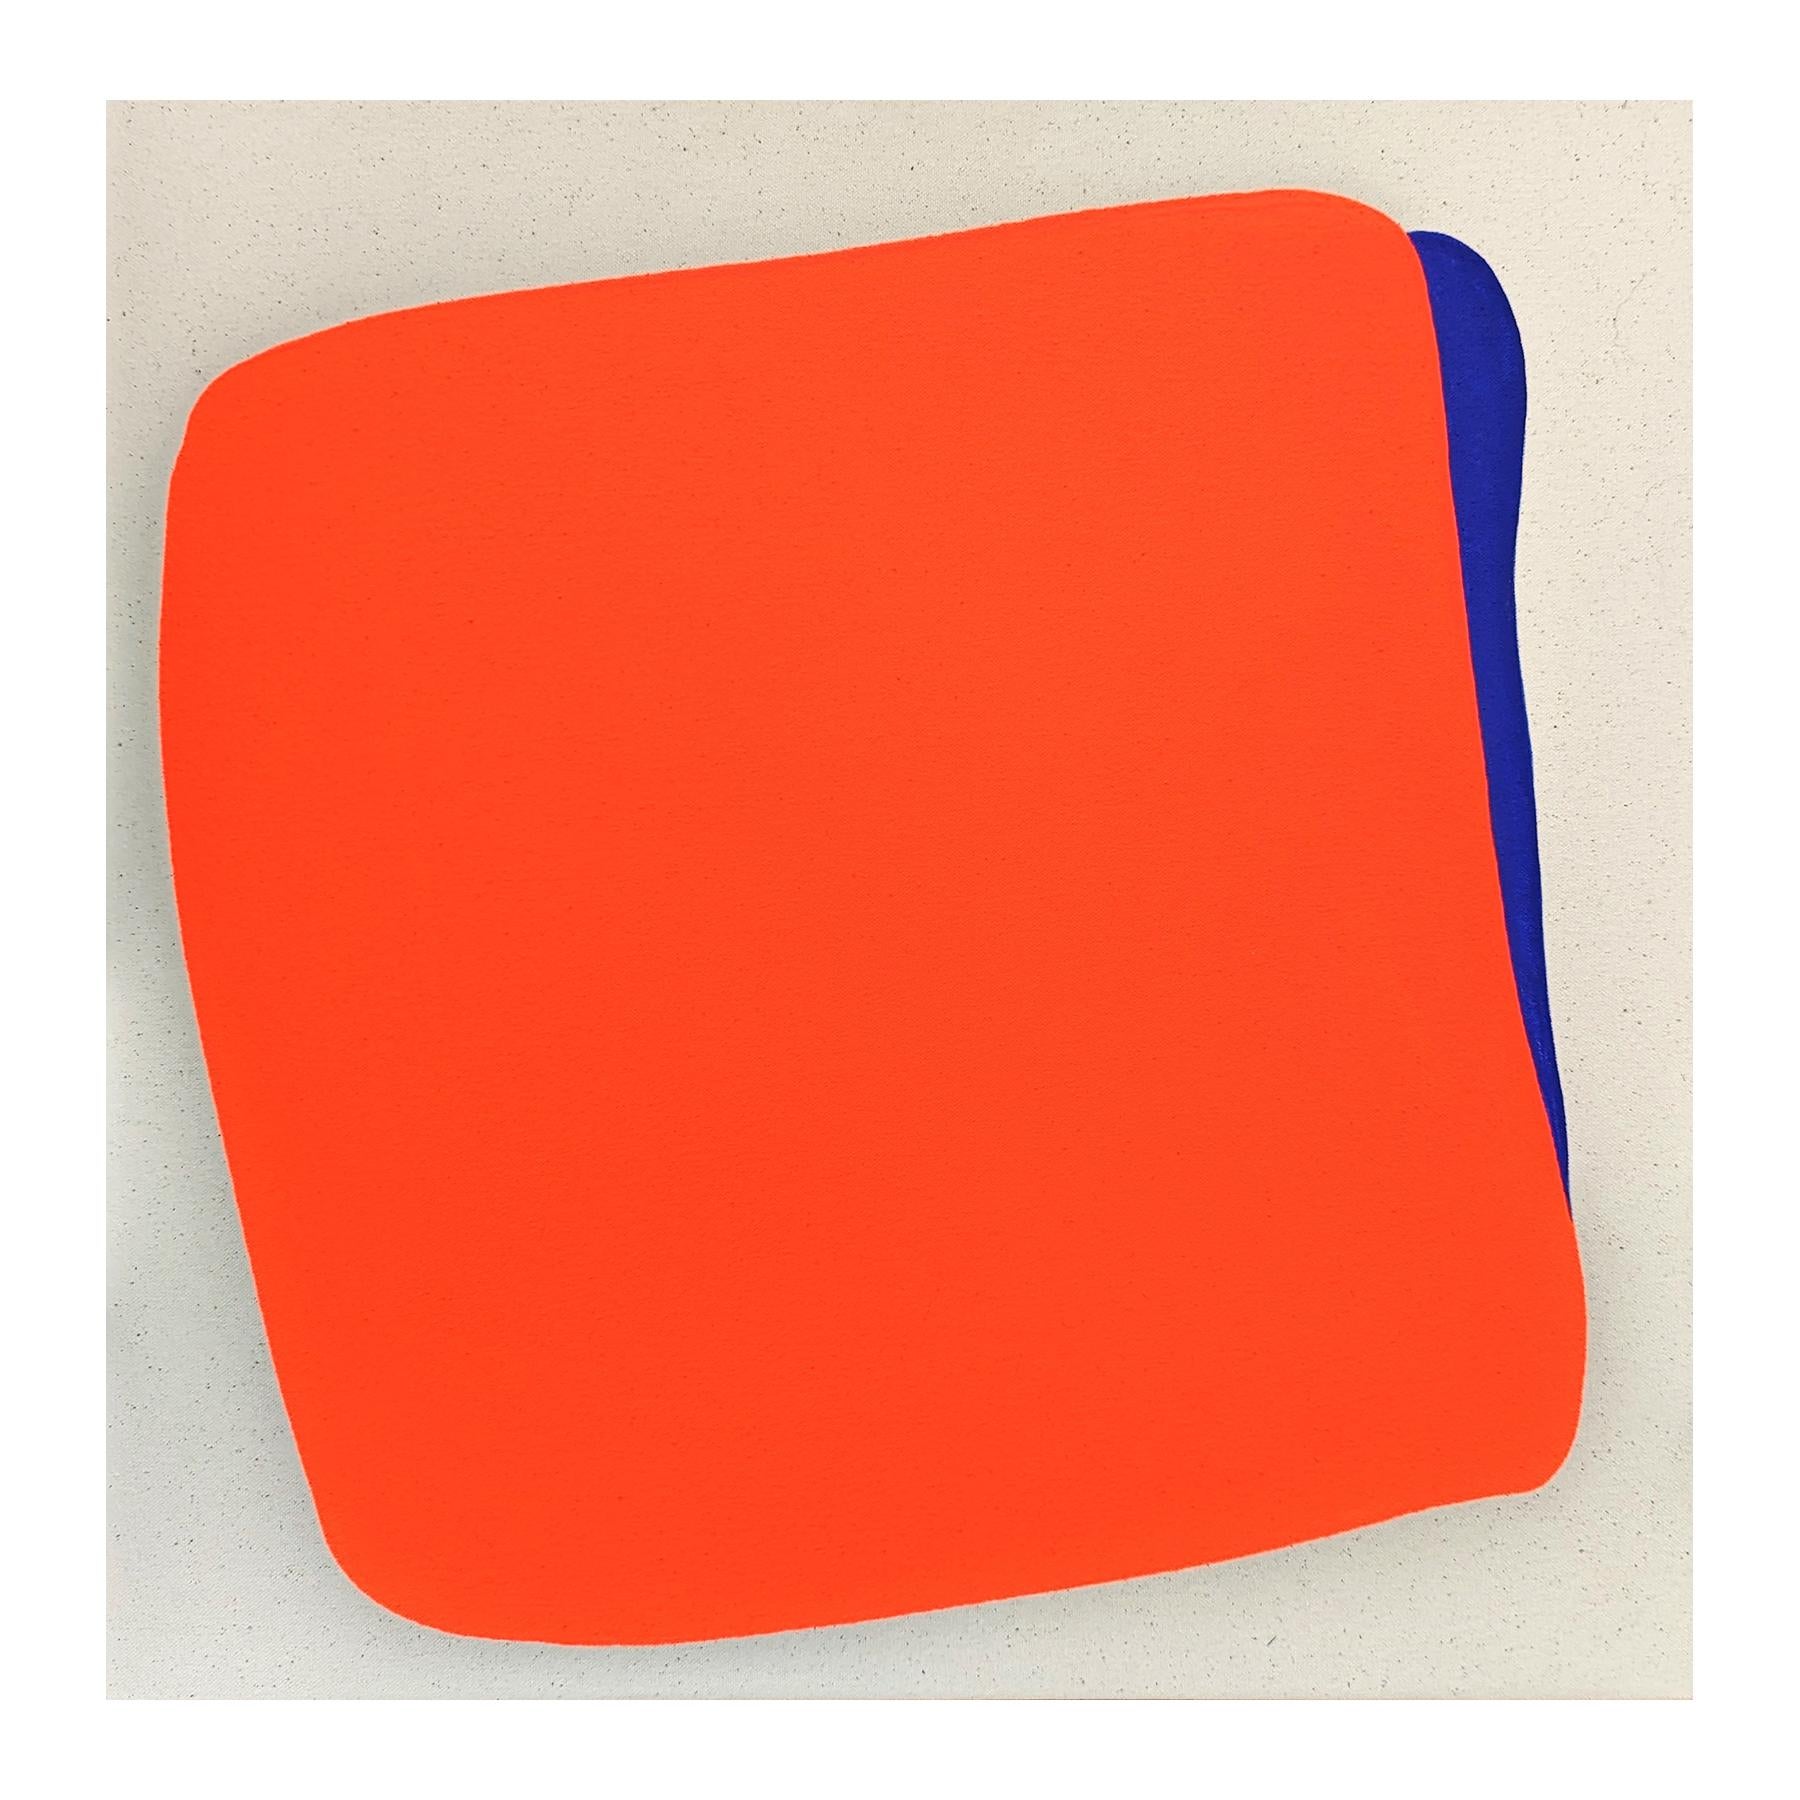 Contemporary abstract painting by Houston-based artist Gary Griffin. The work features a central orange and blue rounded square shape set against an off-white background. Signed, titled, and dated on the reverse. Currently unframed, but options are